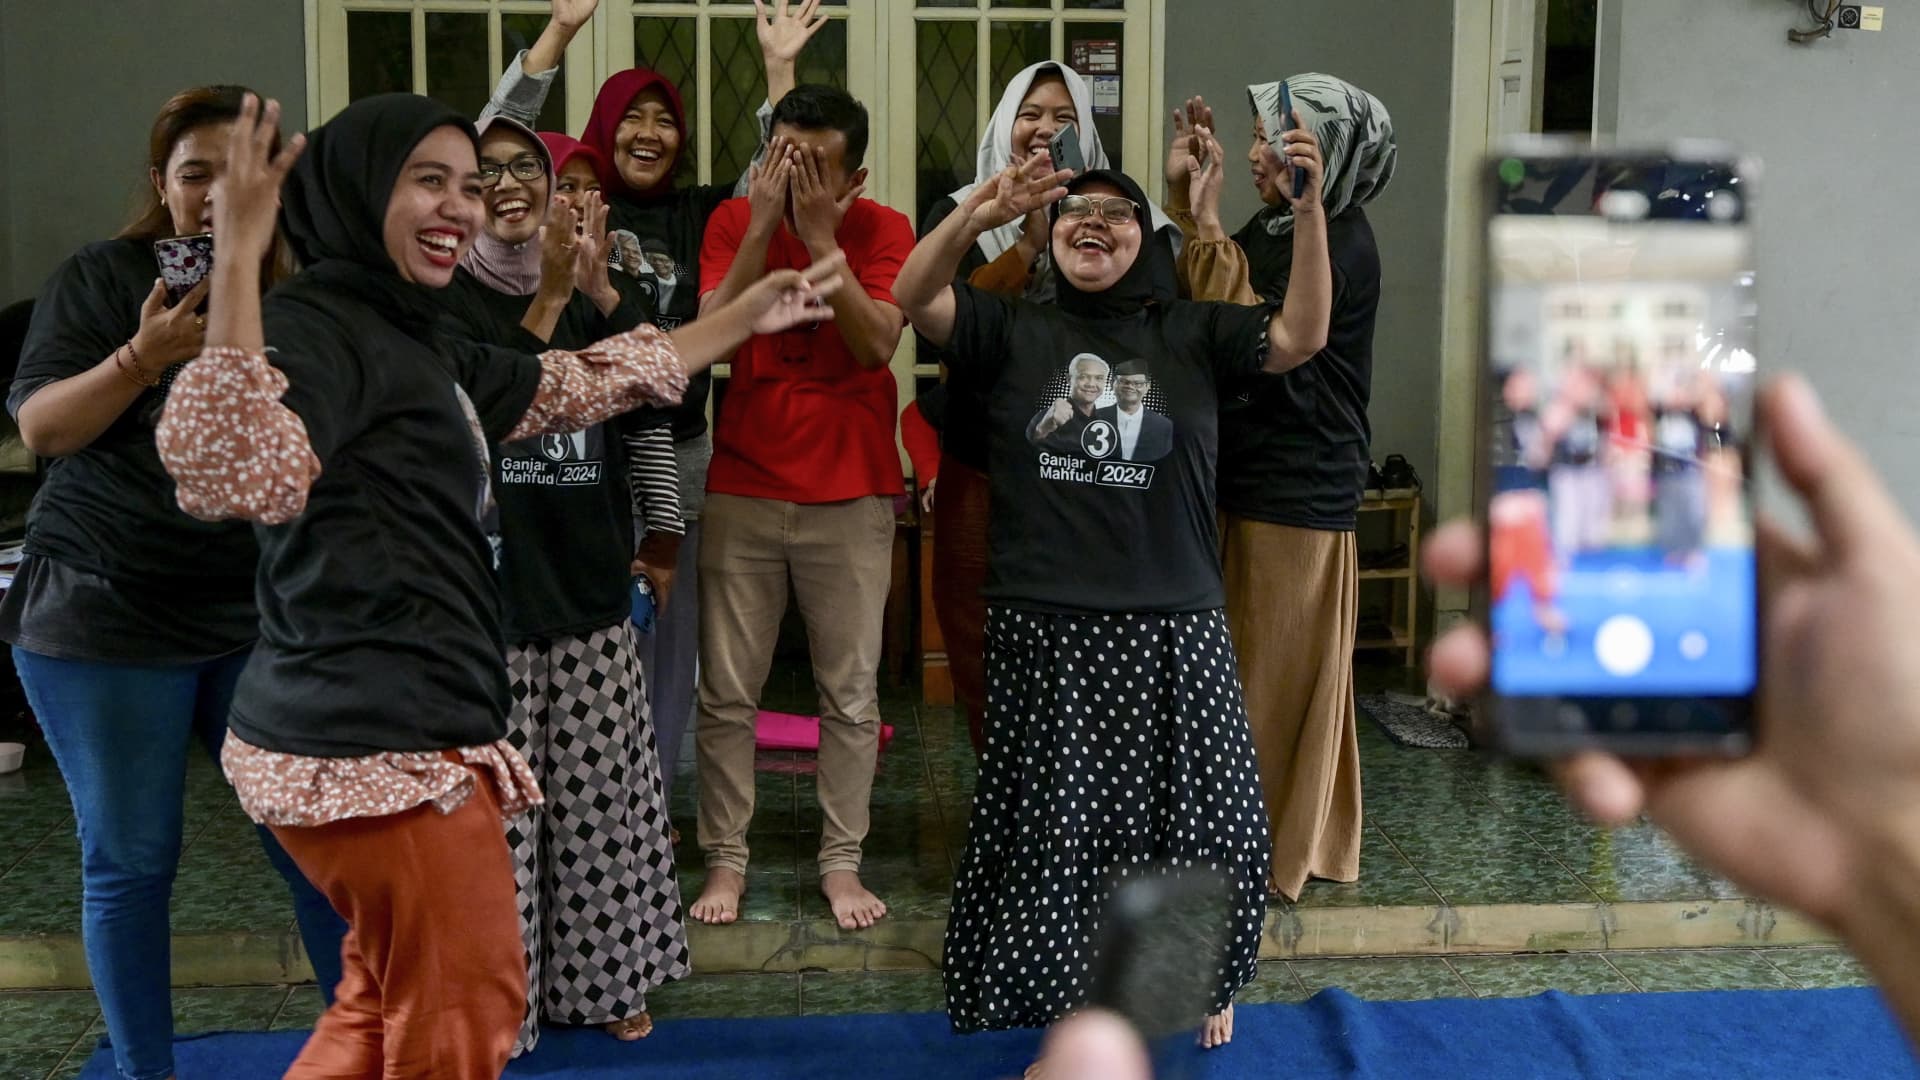 From K-pop to ‘Top Gun,’ Indonesia&#x27s presidential hopefuls struggle it out with TikTok gimmicks